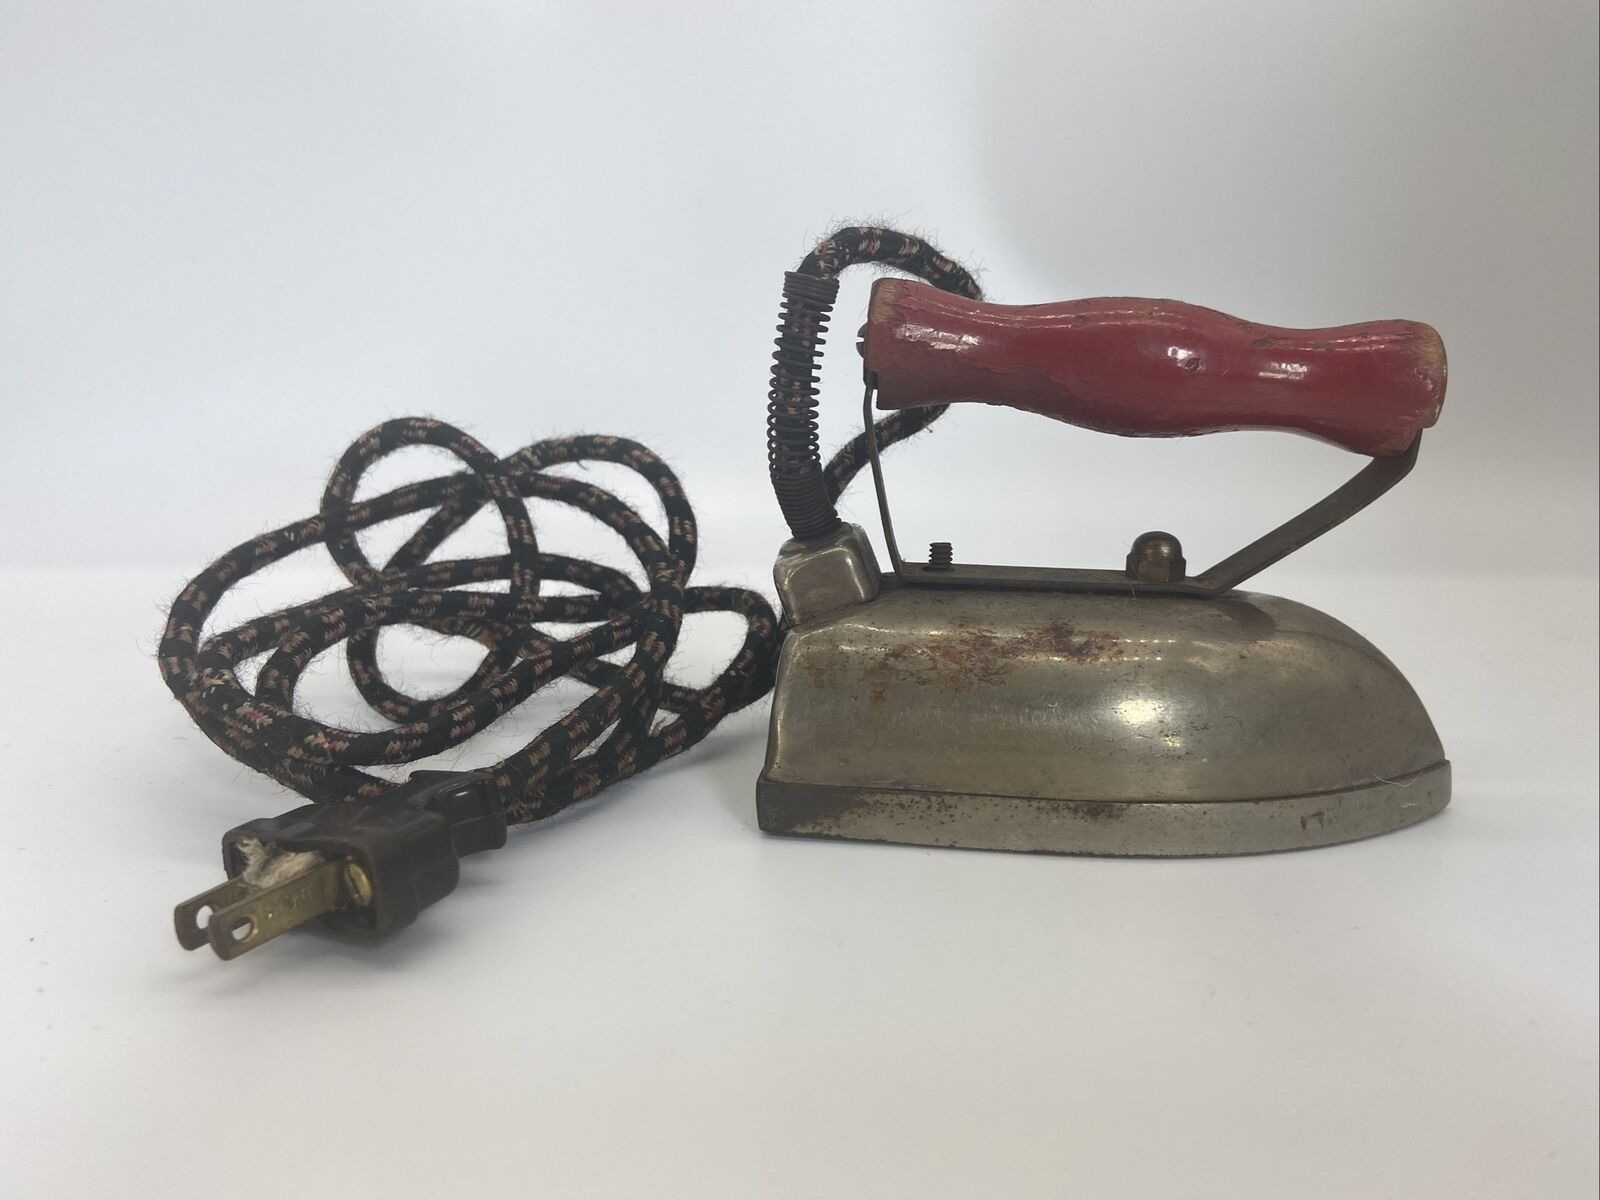 Vintage Antique Utility Iron with Original Cloth Wrapped Cord Red Wood Handle